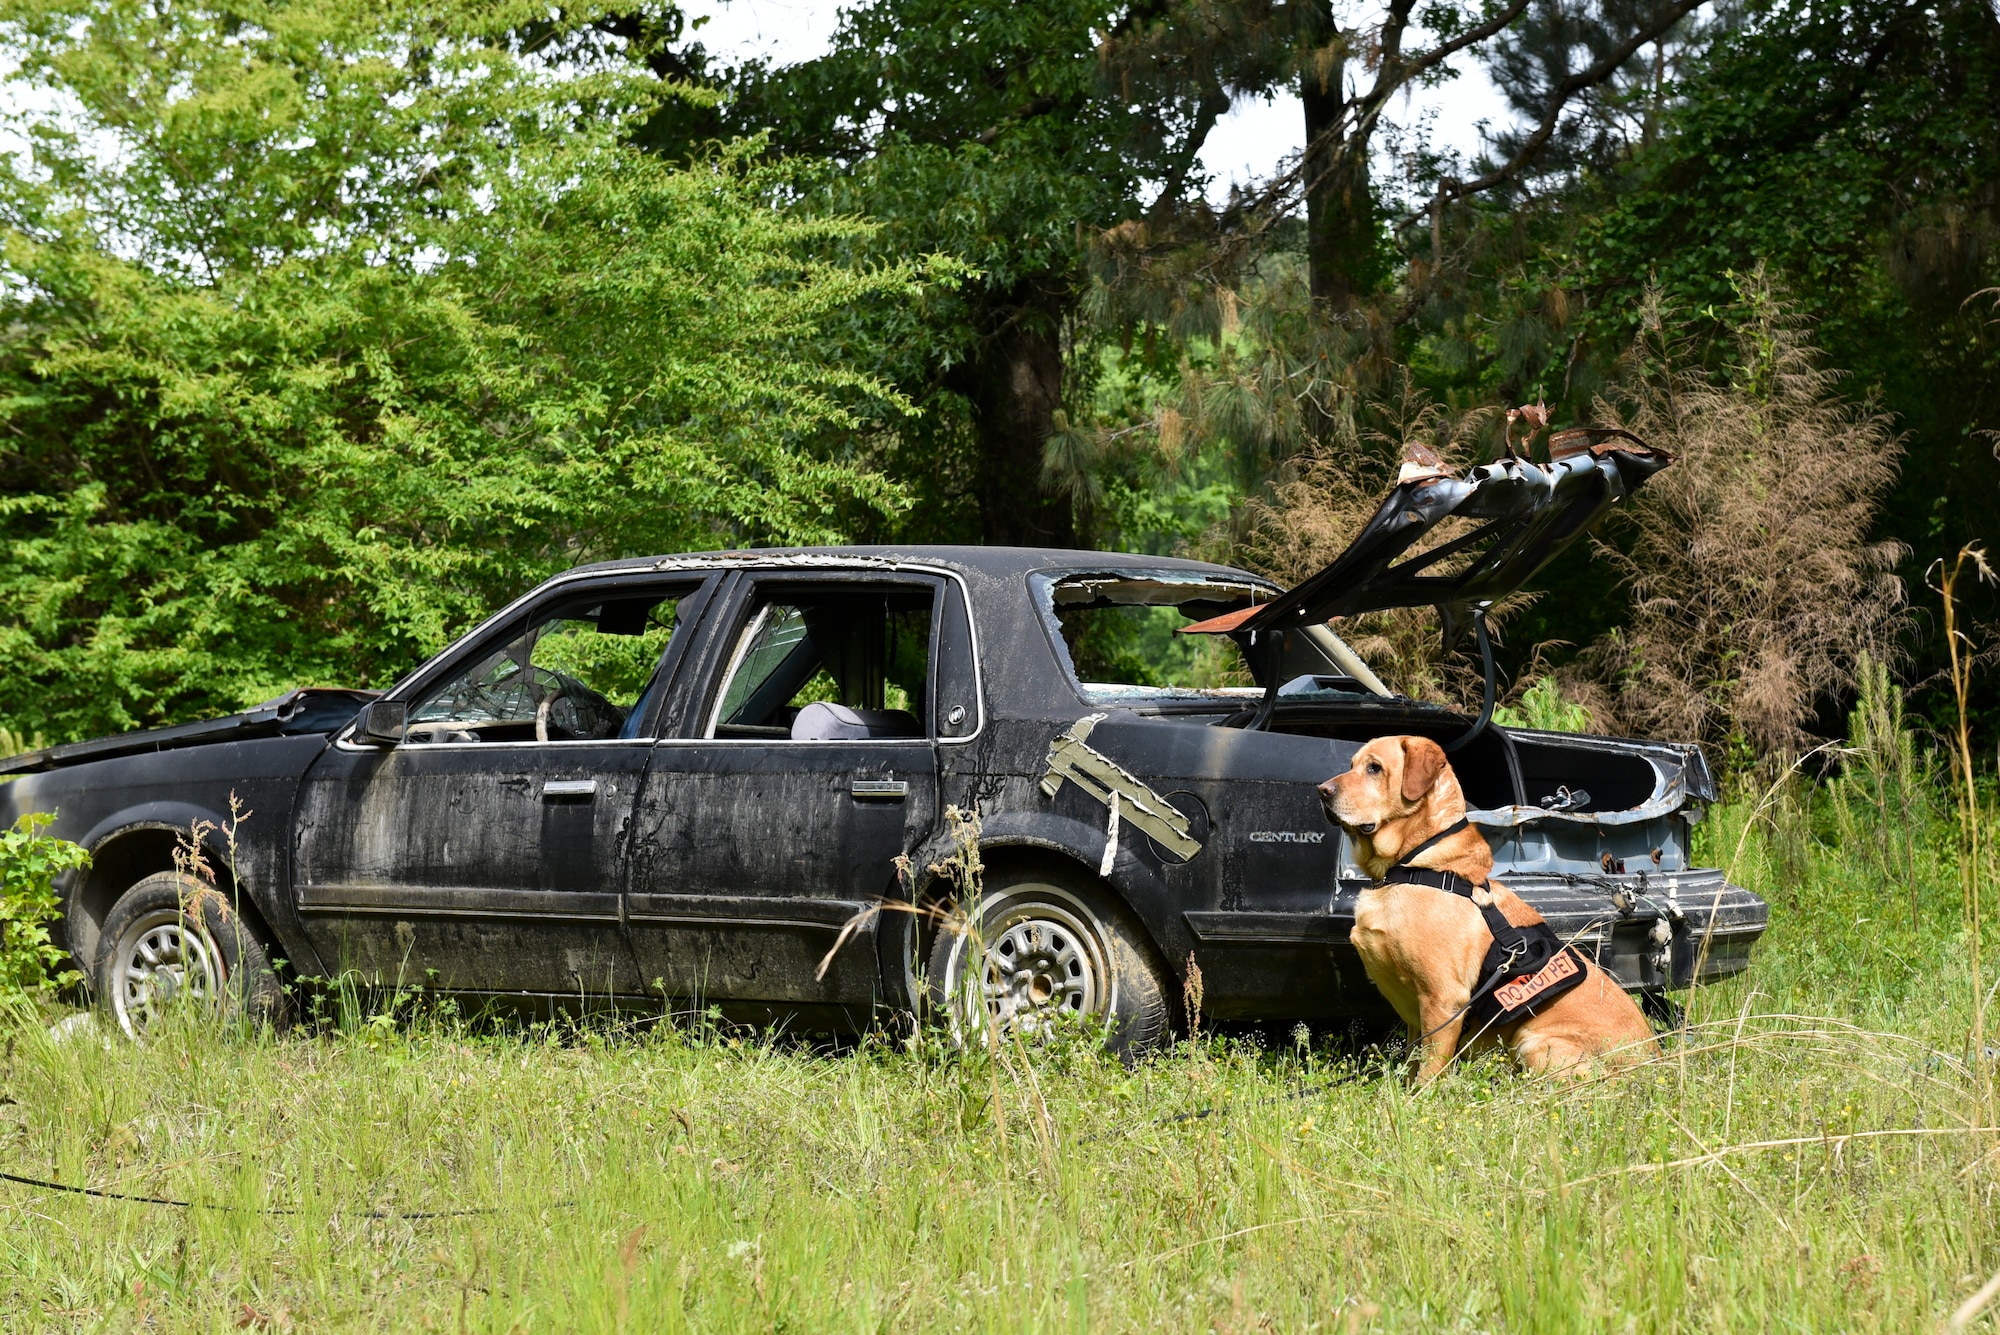 Ben66, Transportation Security Administration explosives detection canine, sits to signal that he detected explosive material during a joint interagency training day at Seymour Johnson Air Force Base, North Carolina, April 20, 2021. The canines are trained to sit when they detect explosives in case it is set to detonate by loud sounds or when moved. (U.S. Air Force photo by Staff Sgt. Kenneth Boyton)